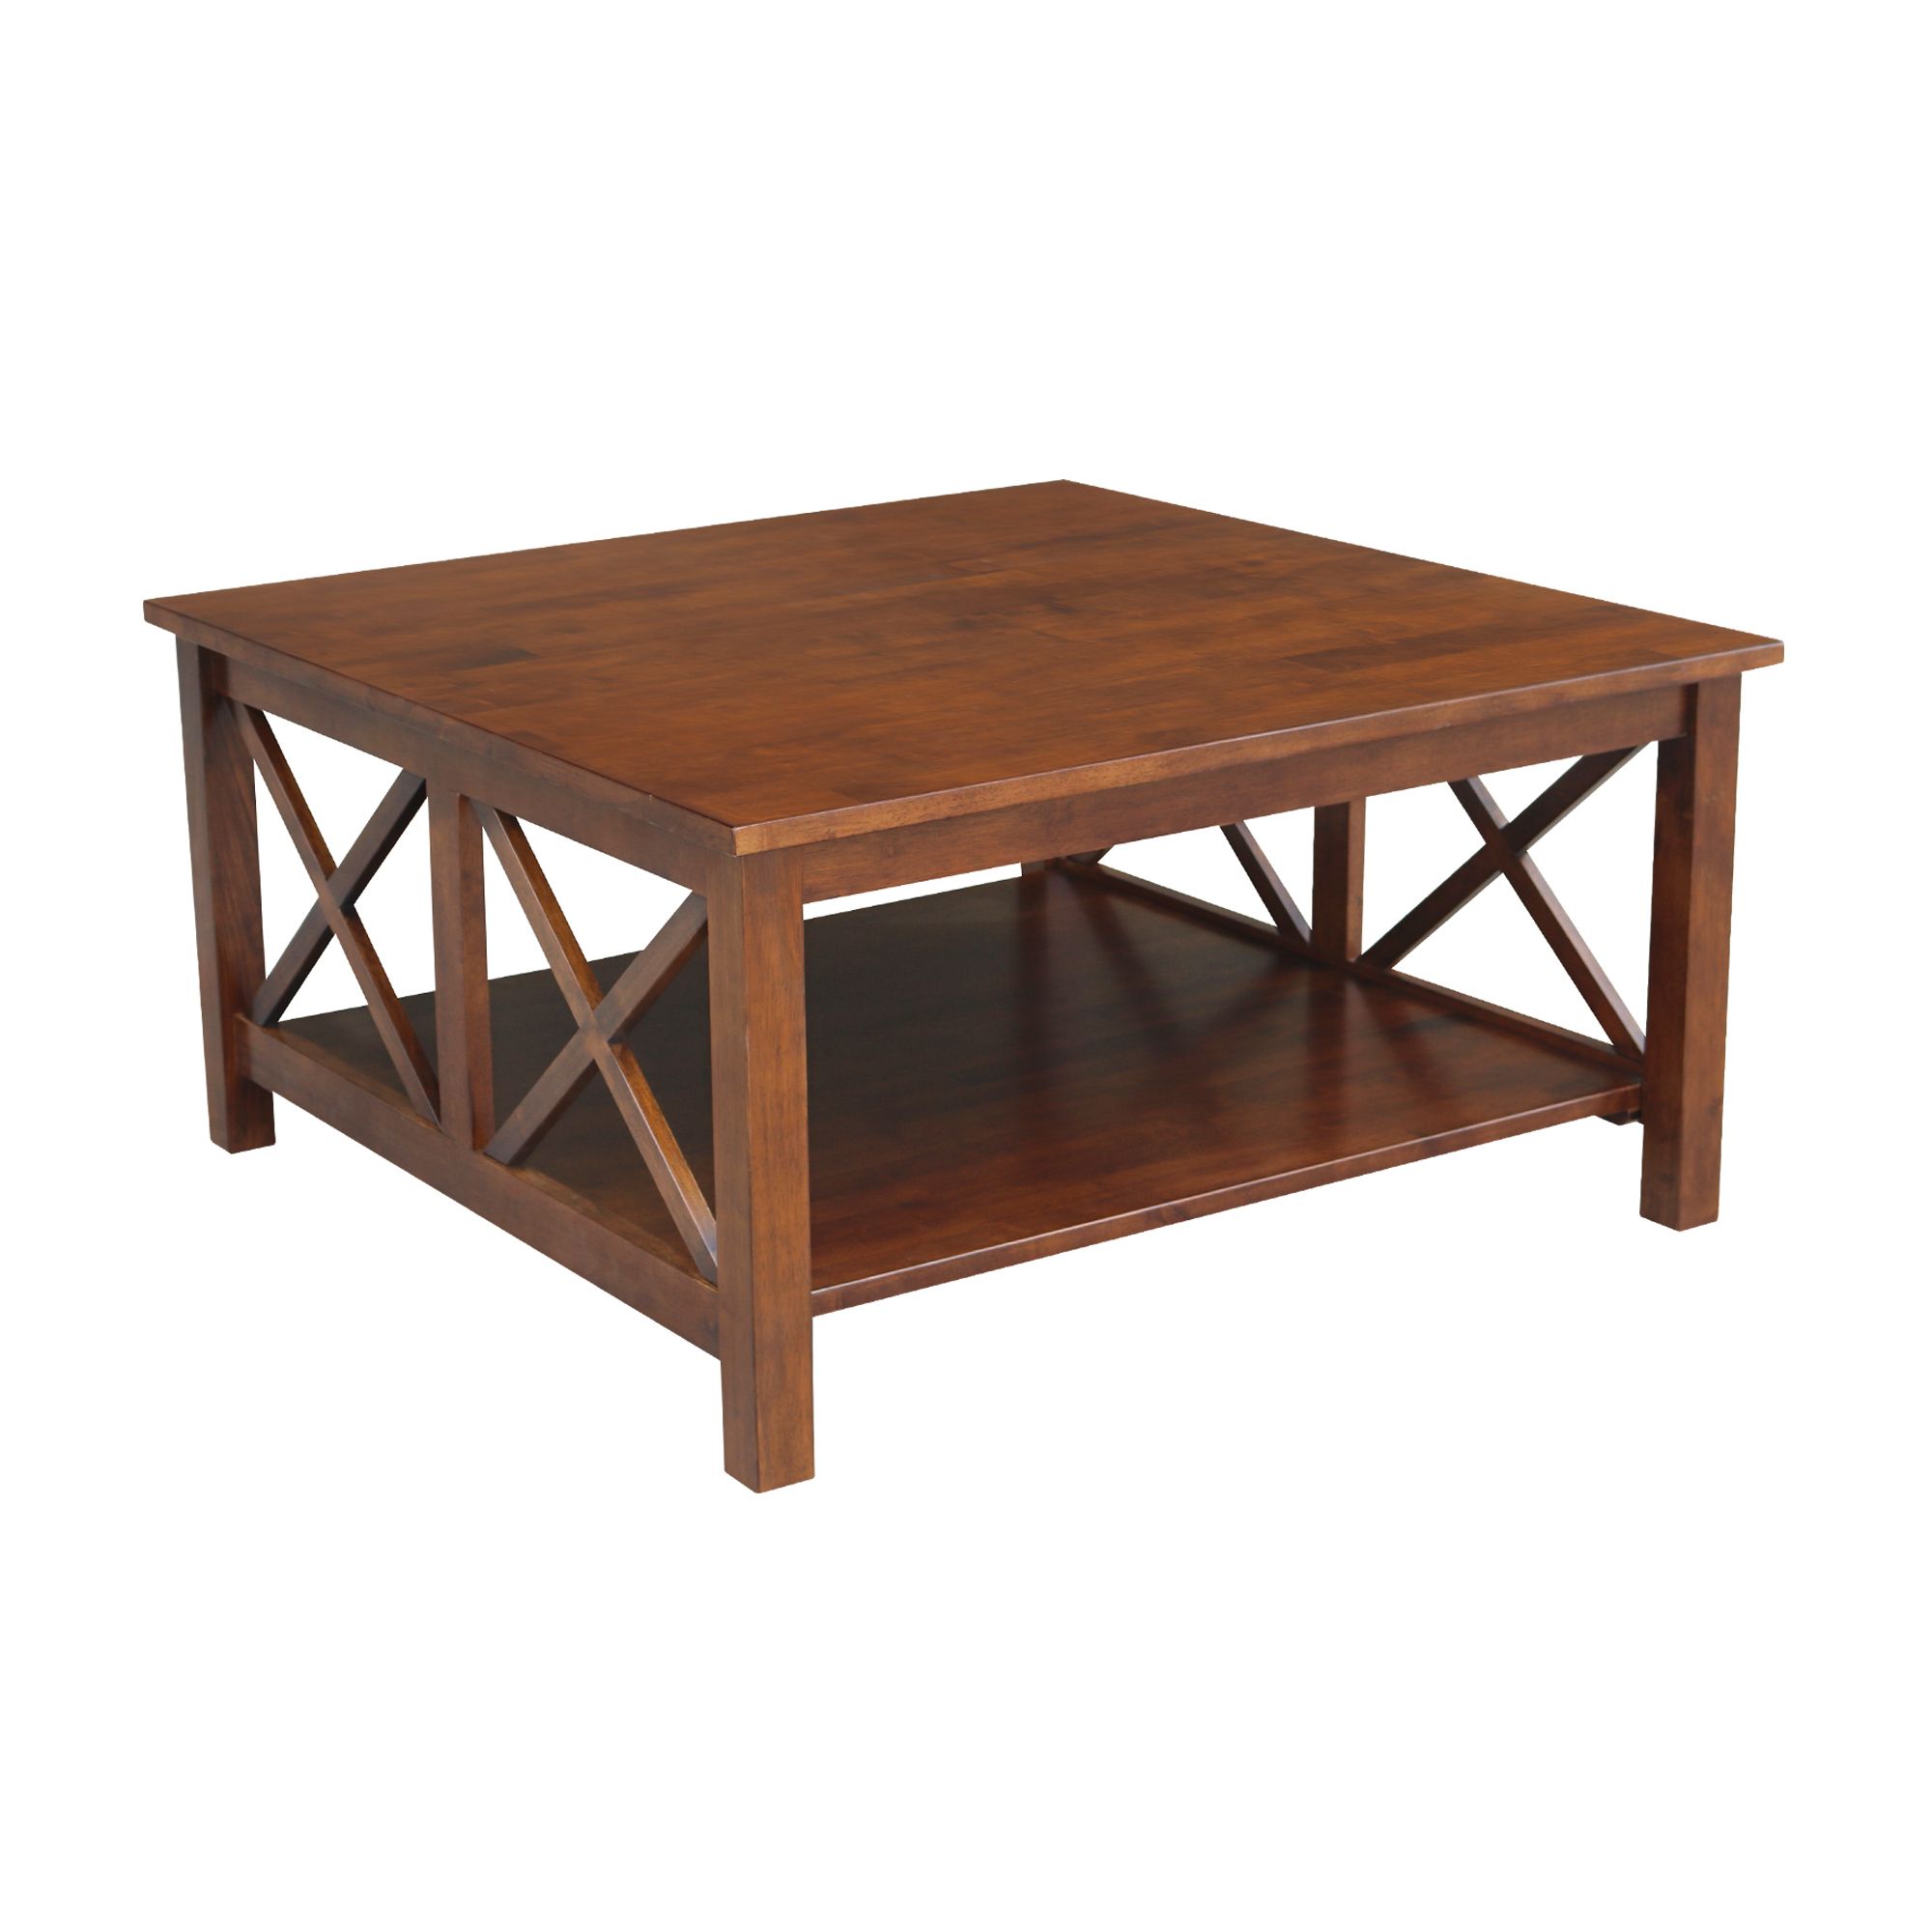 International Concepts Hampton Square Coffee Table – Walmart Throughout Famous Square Coffee Tables (View 10 of 10)